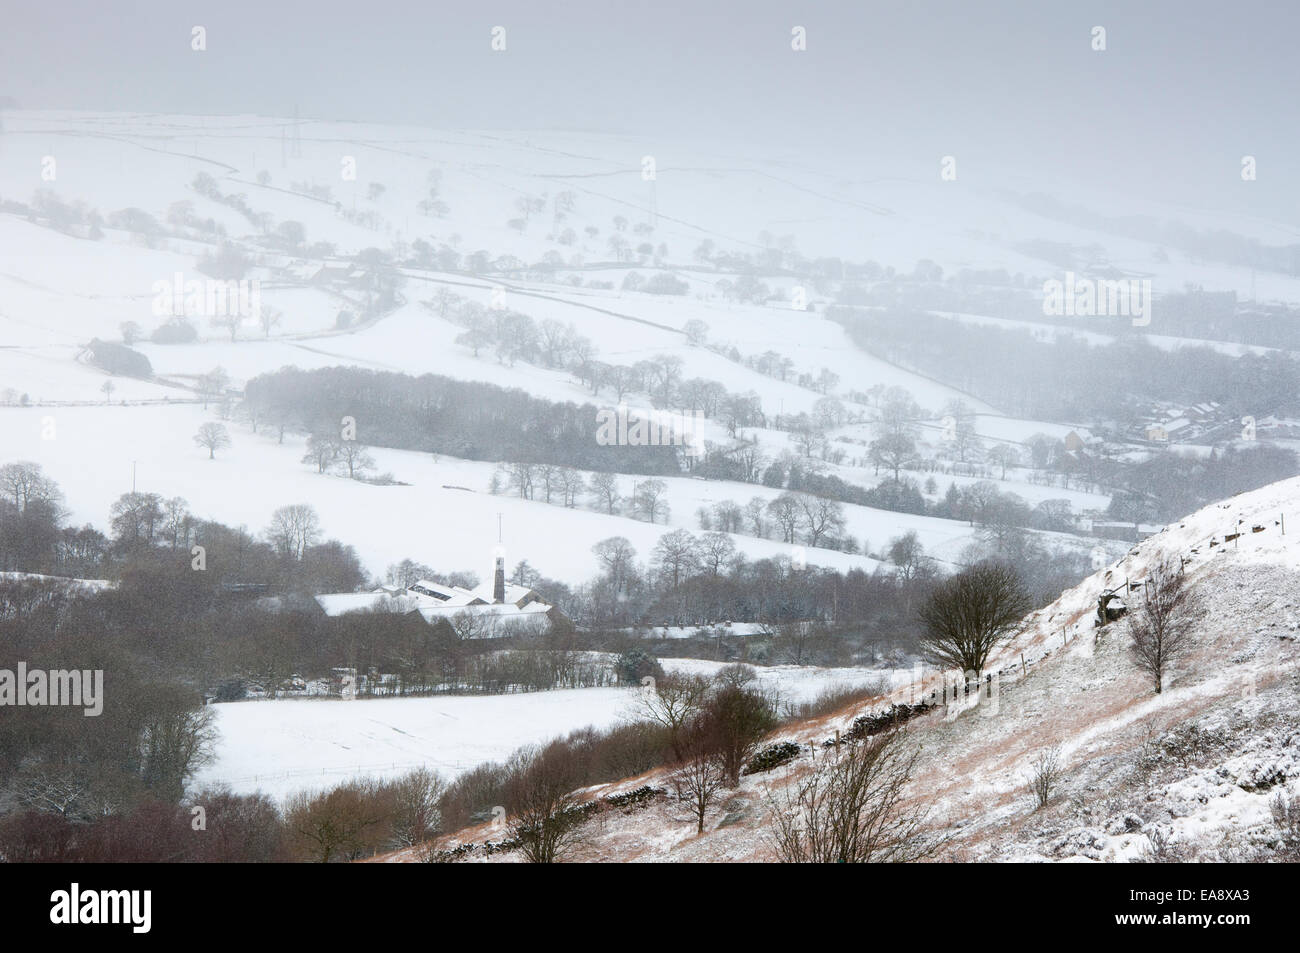 Snowy winter landscape in Northern England. Falling snow over rural scene as seen from Coombes edge, Charlesworth. Stock Photo